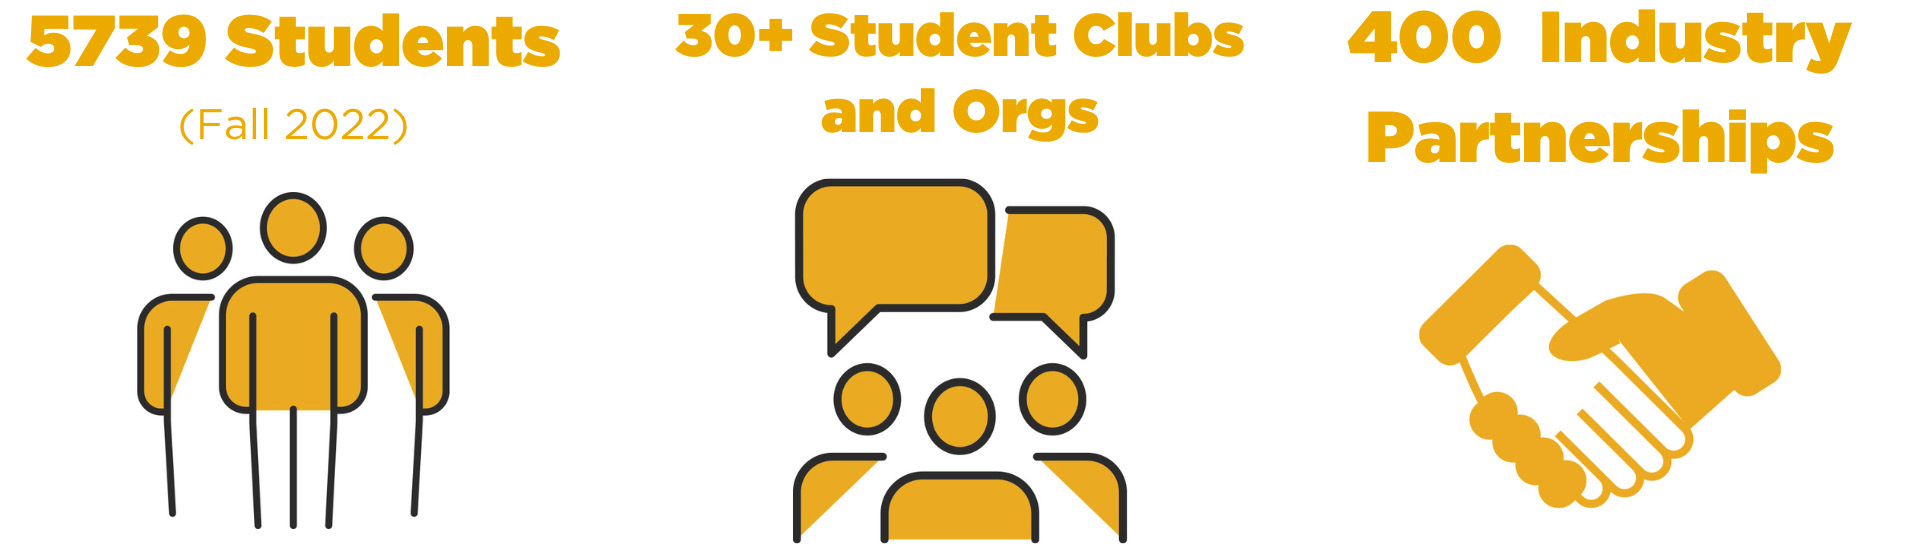 5379 Students, 30+ student clubs, 400 Industry Partnerships